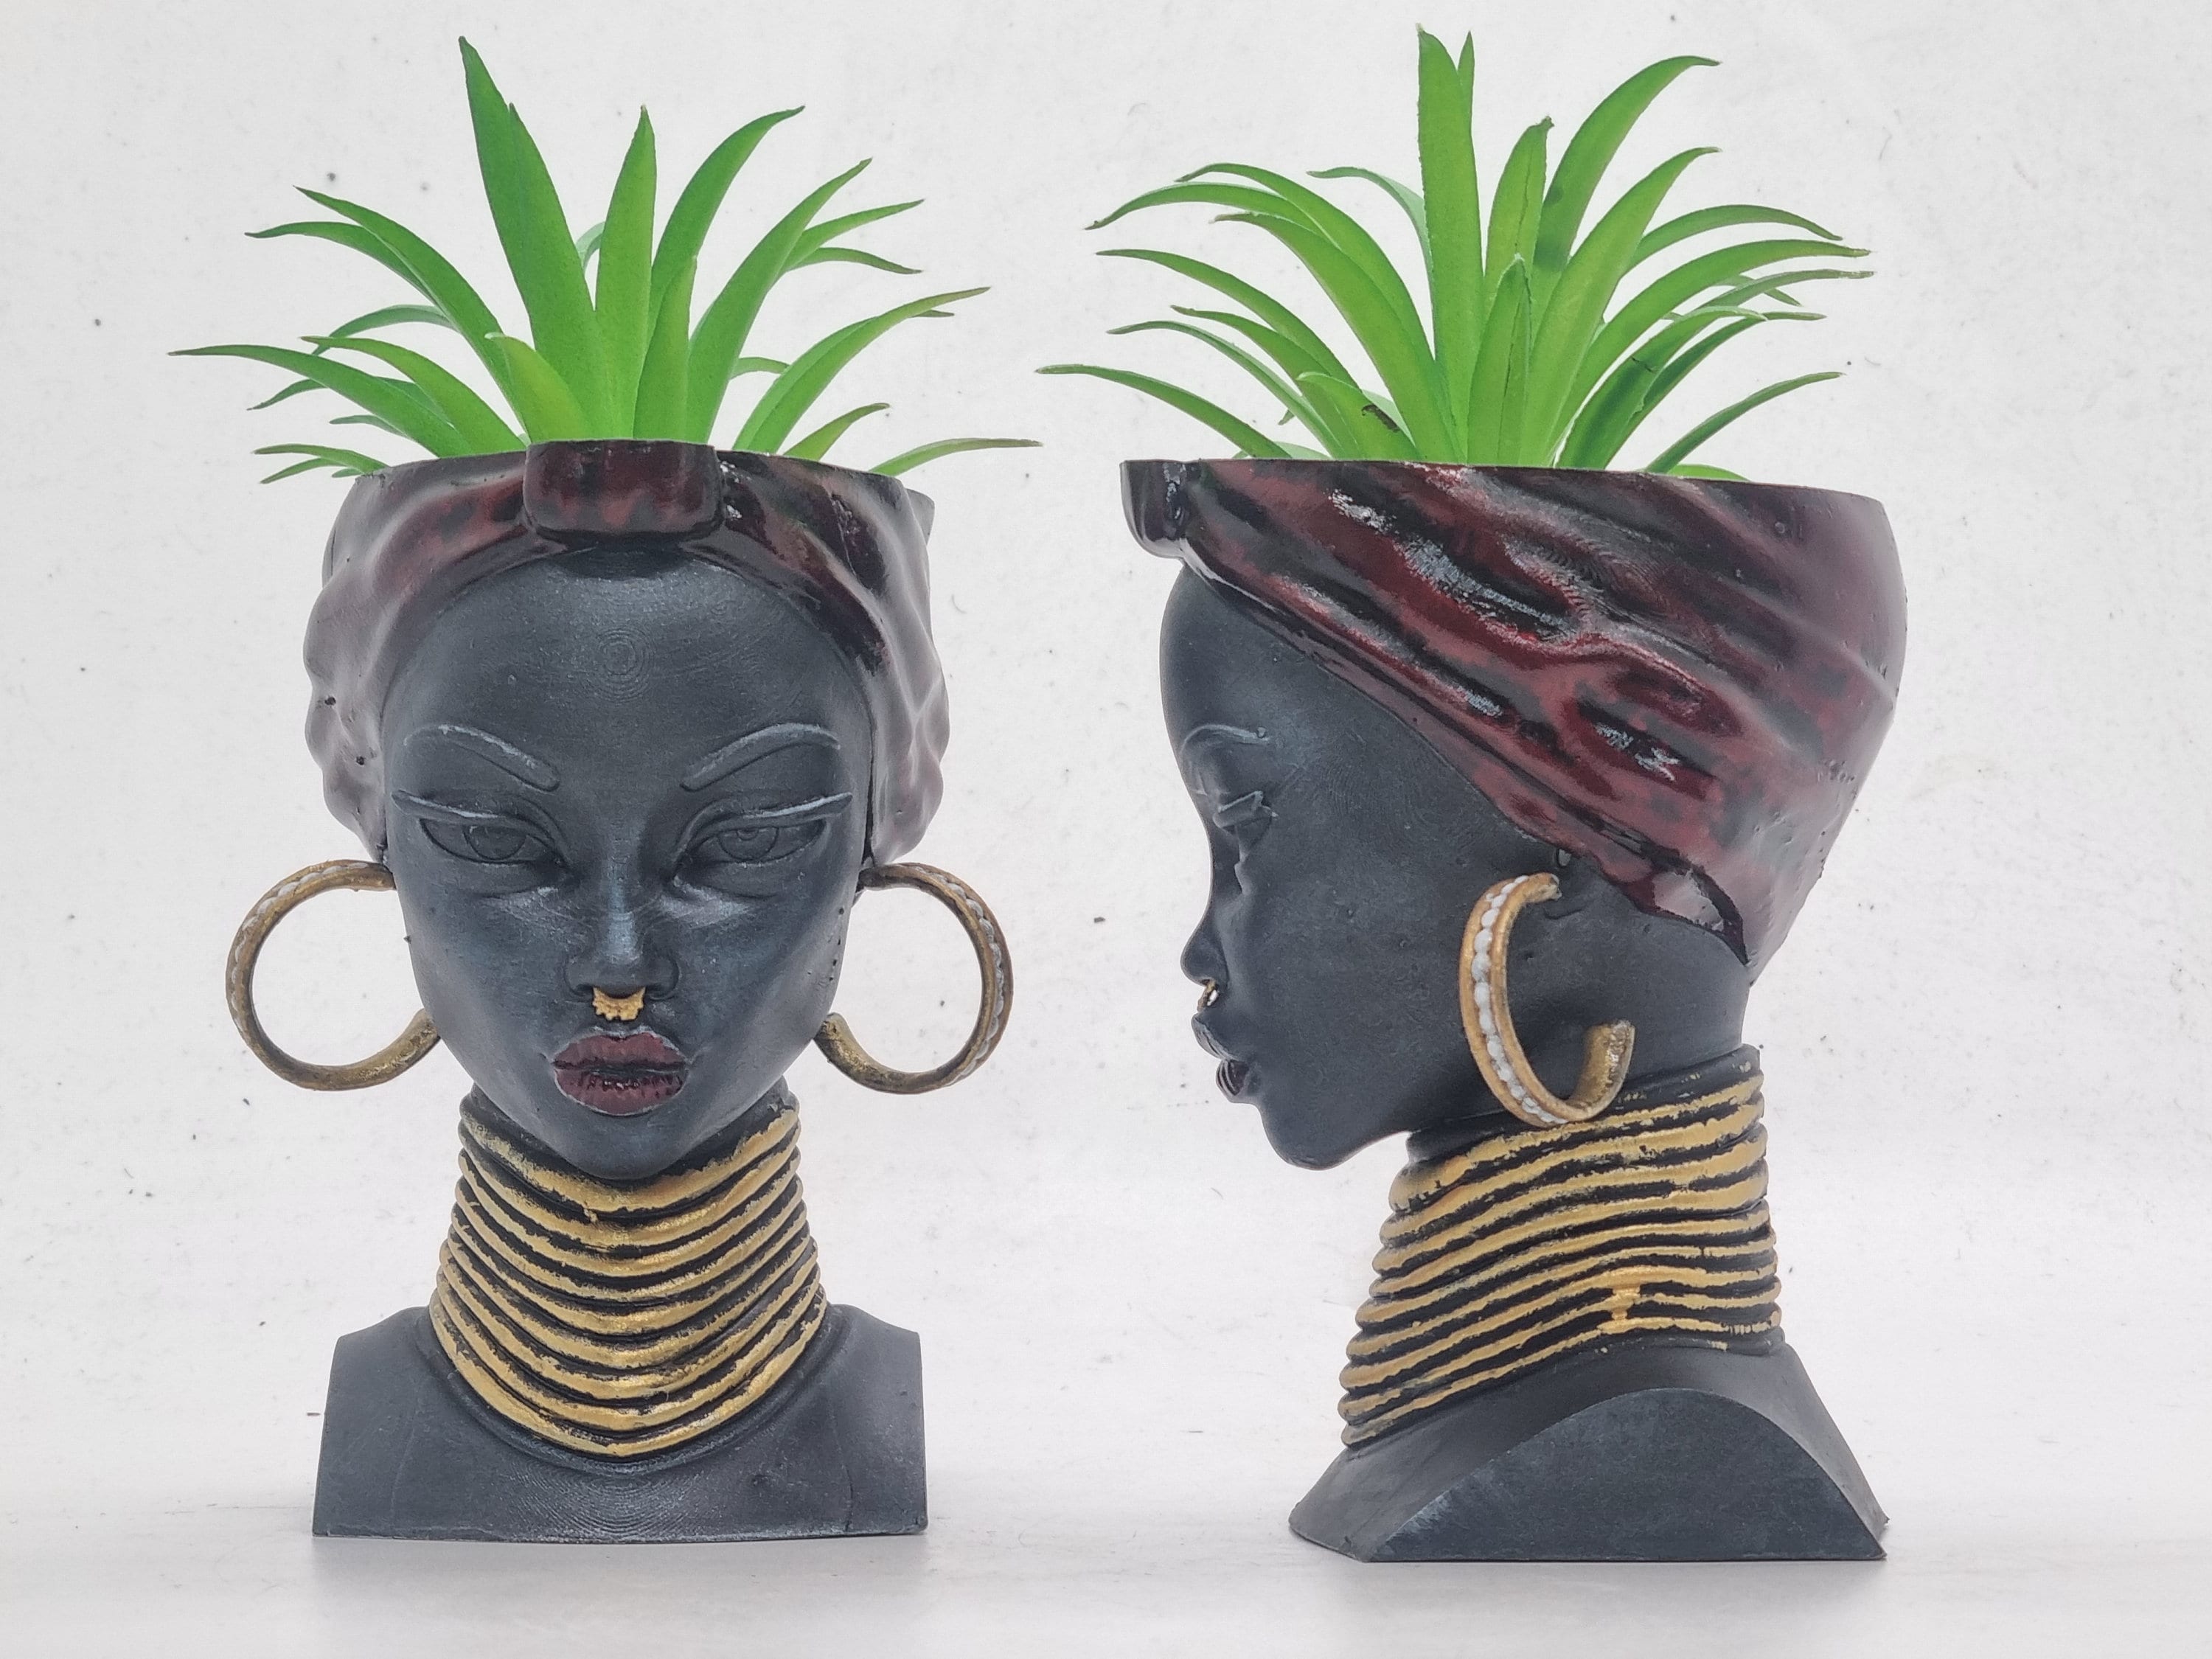 Houseplants Become Hairstyles for Smiling Anthropomorphic Planters